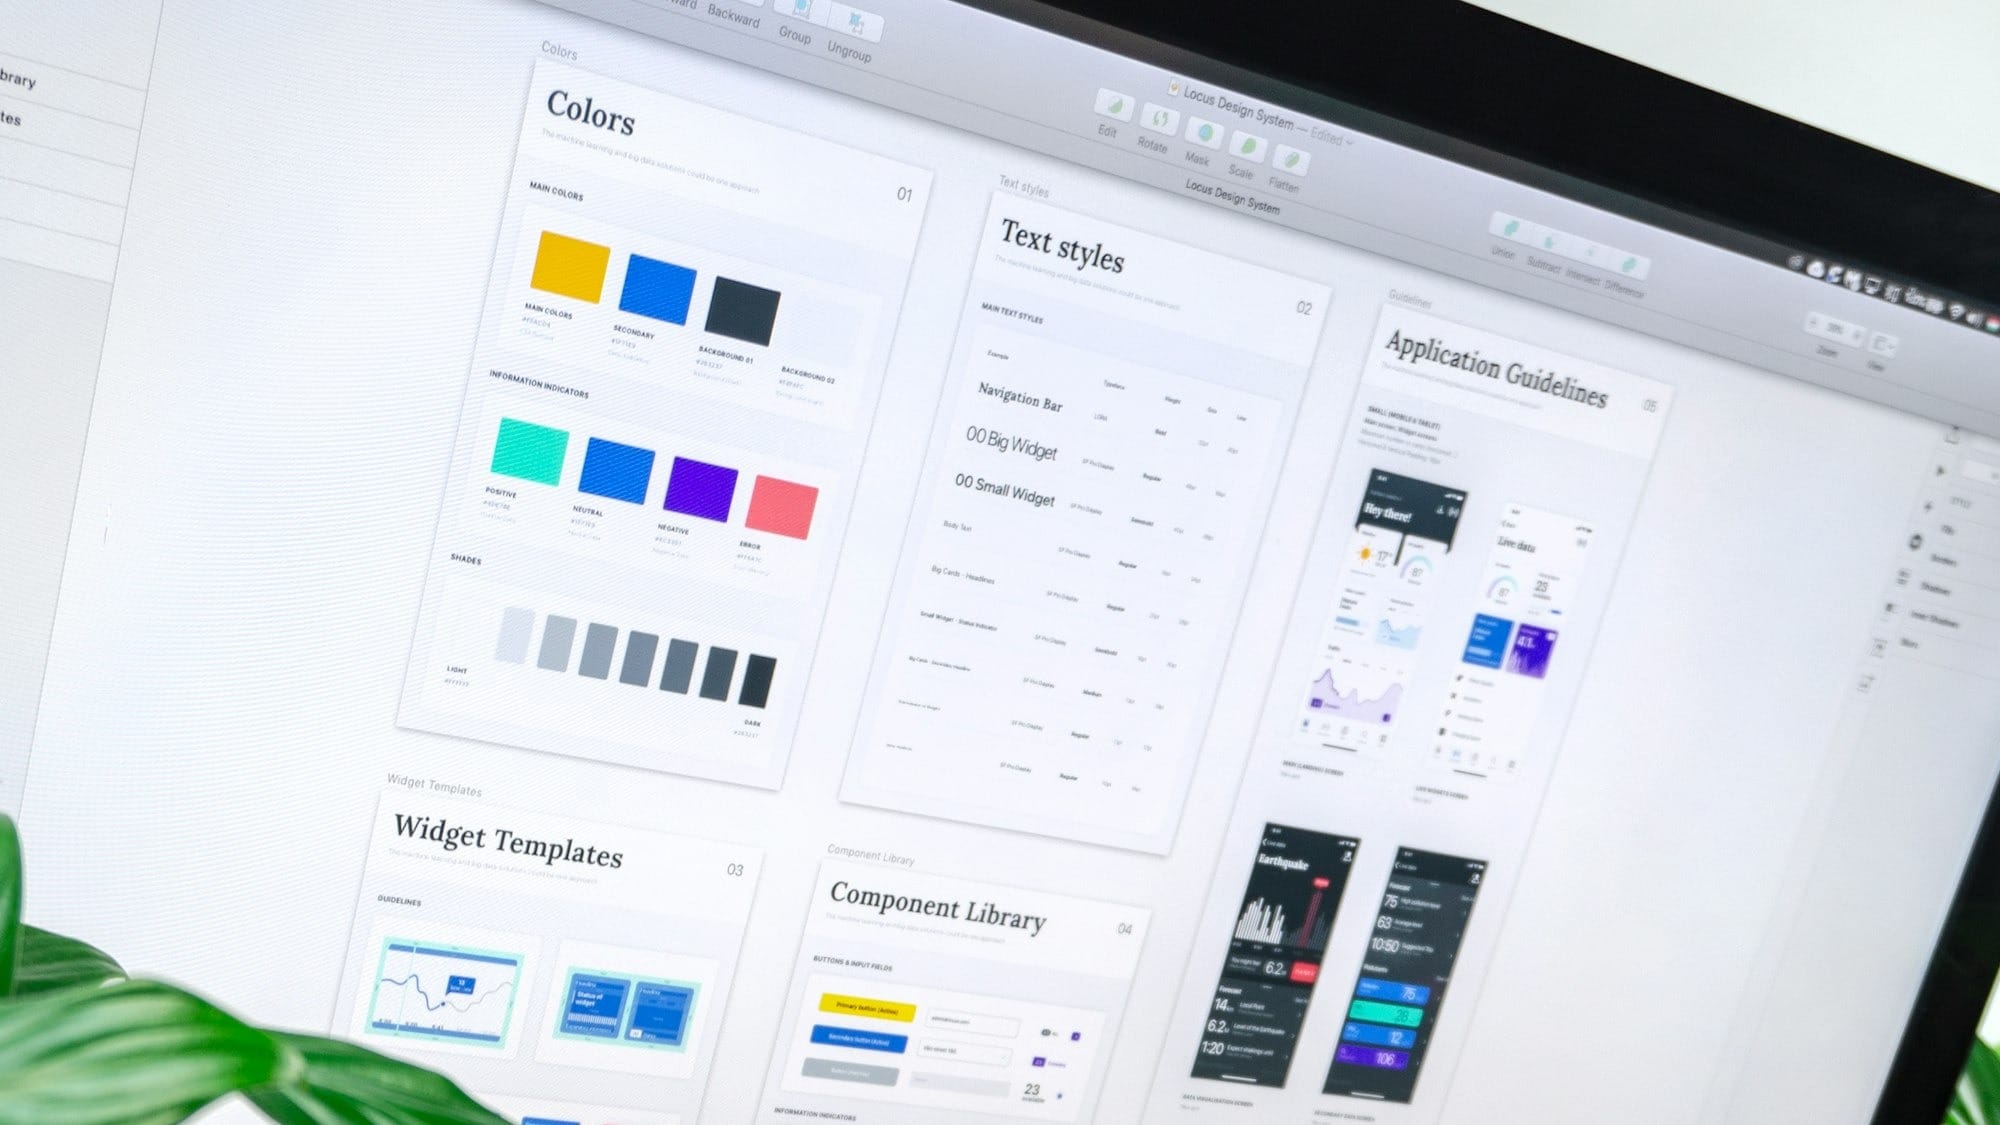 Canva is expanding its design tool kit with a strategic acquisition